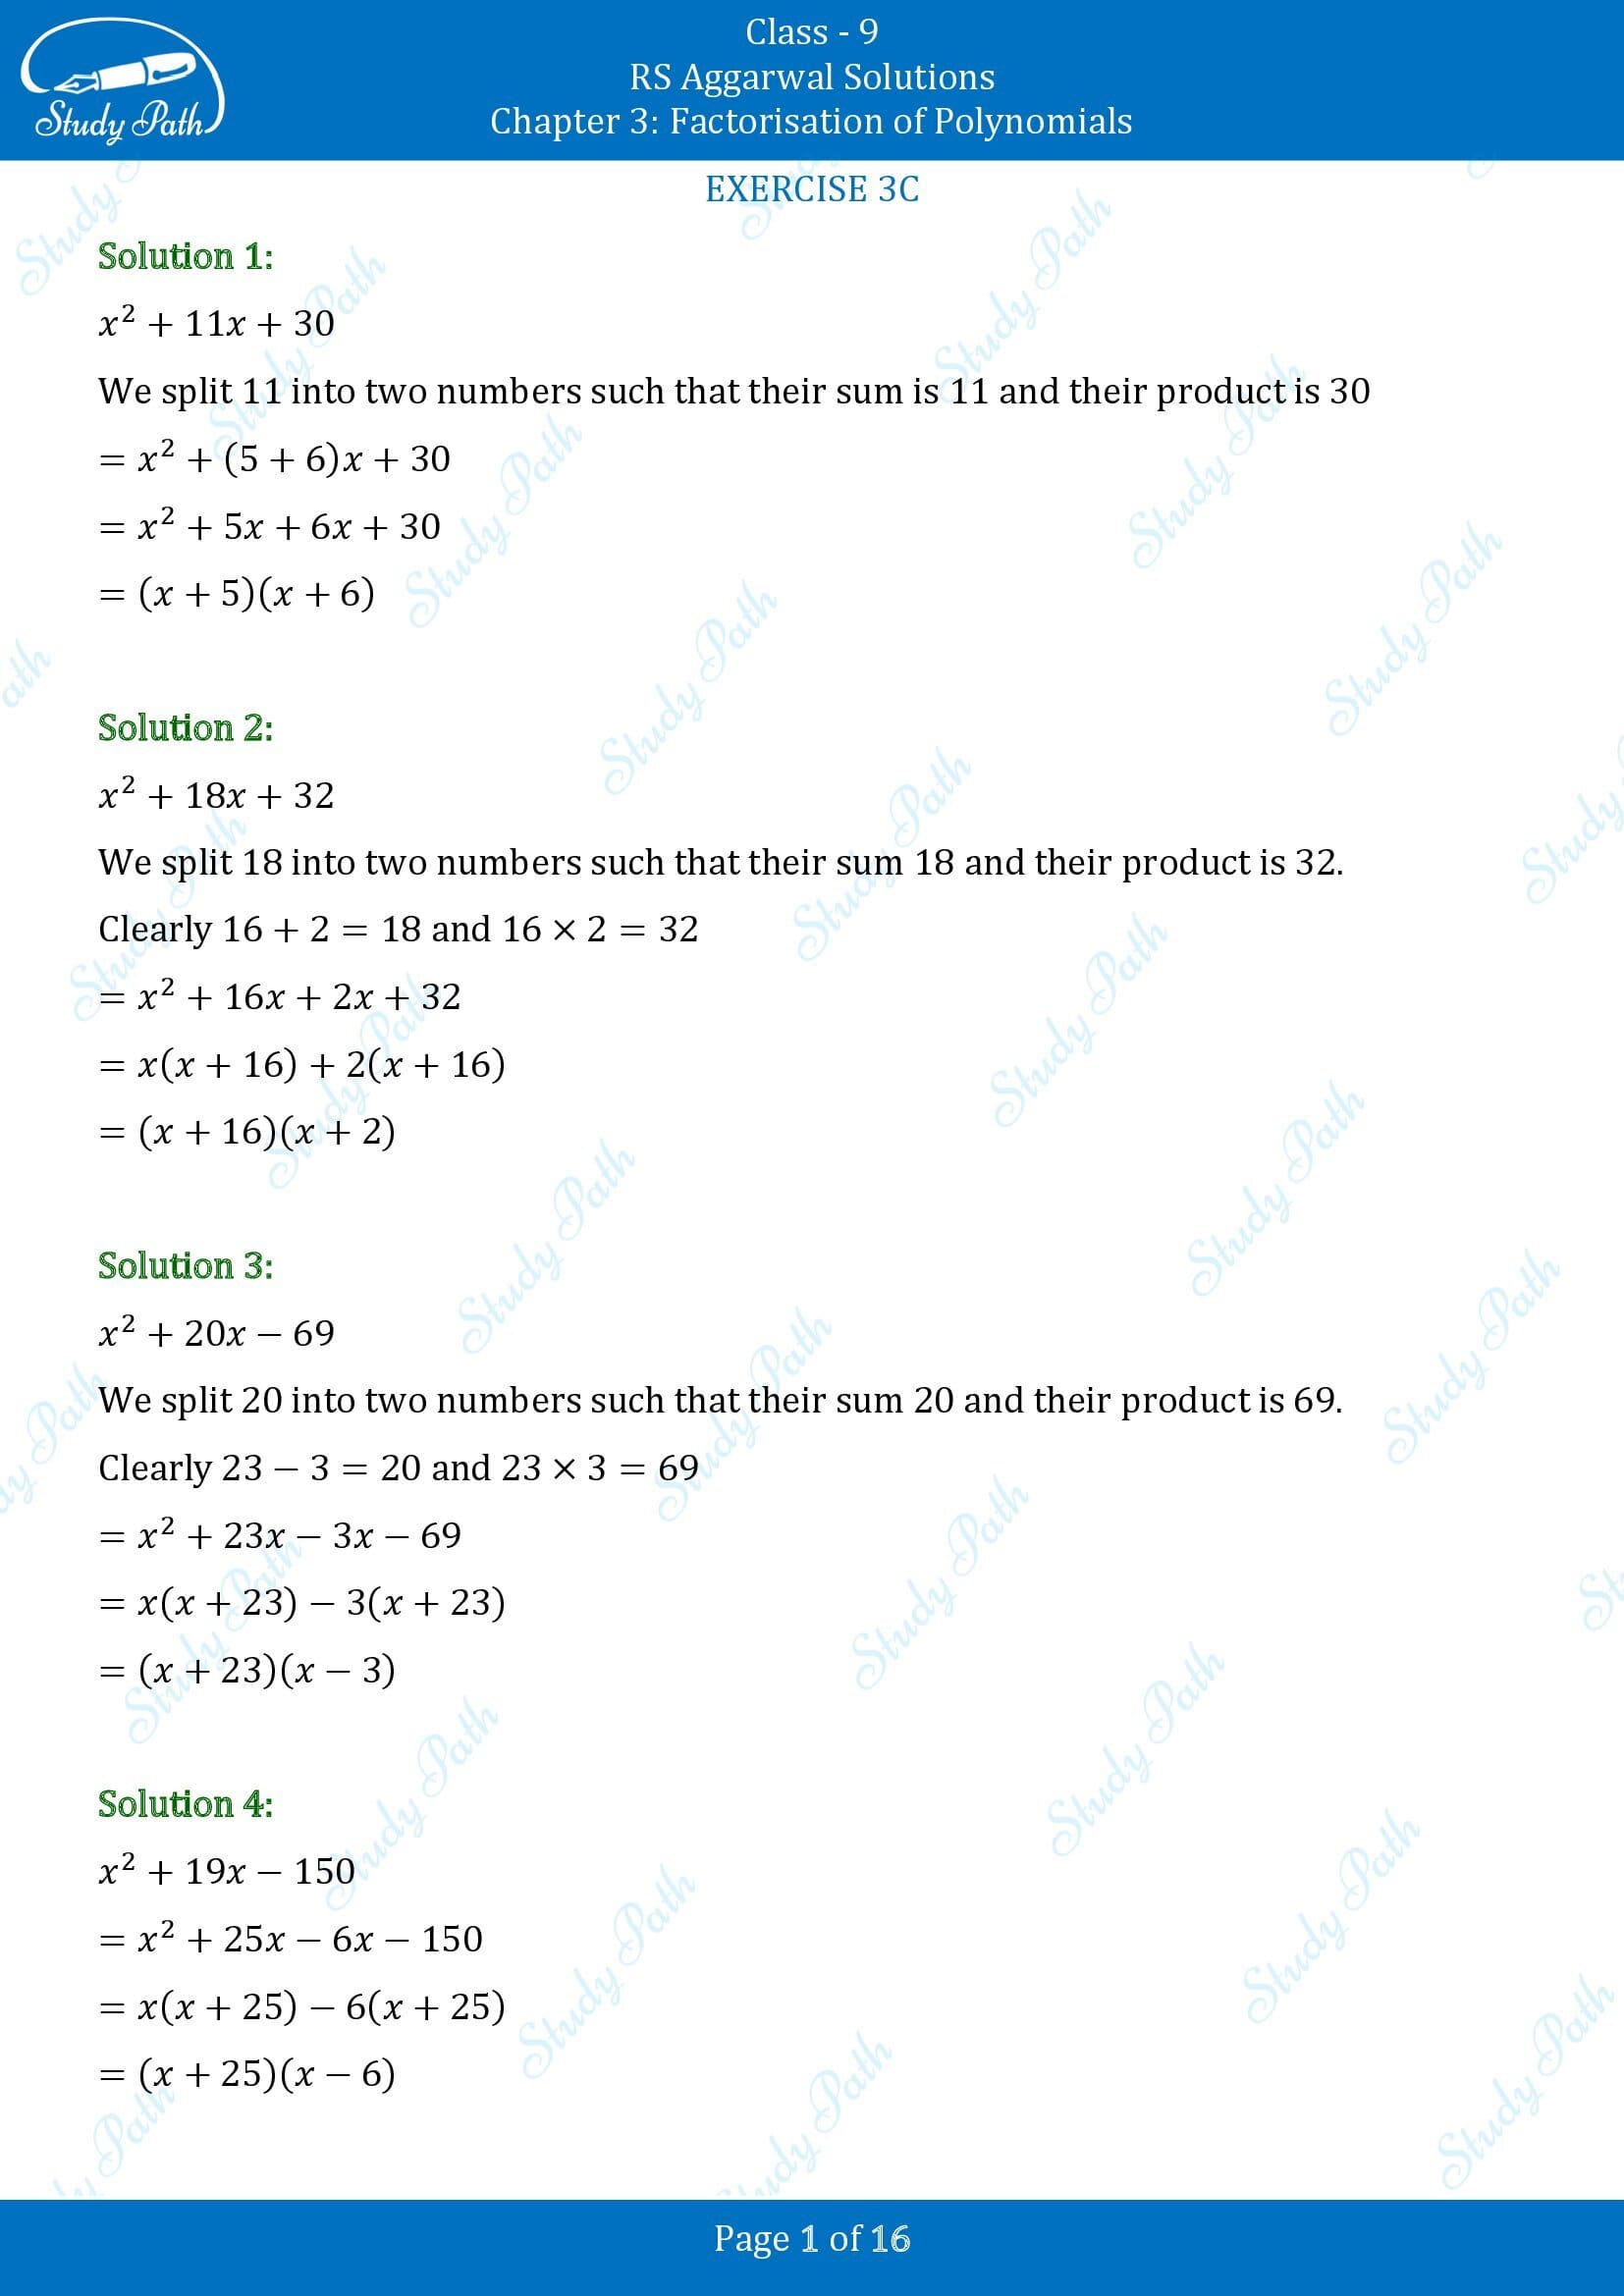 RS Aggarwal Solutions Class 9 Chapter 3 Factorisation of Polynomials Exercise 3C 00001